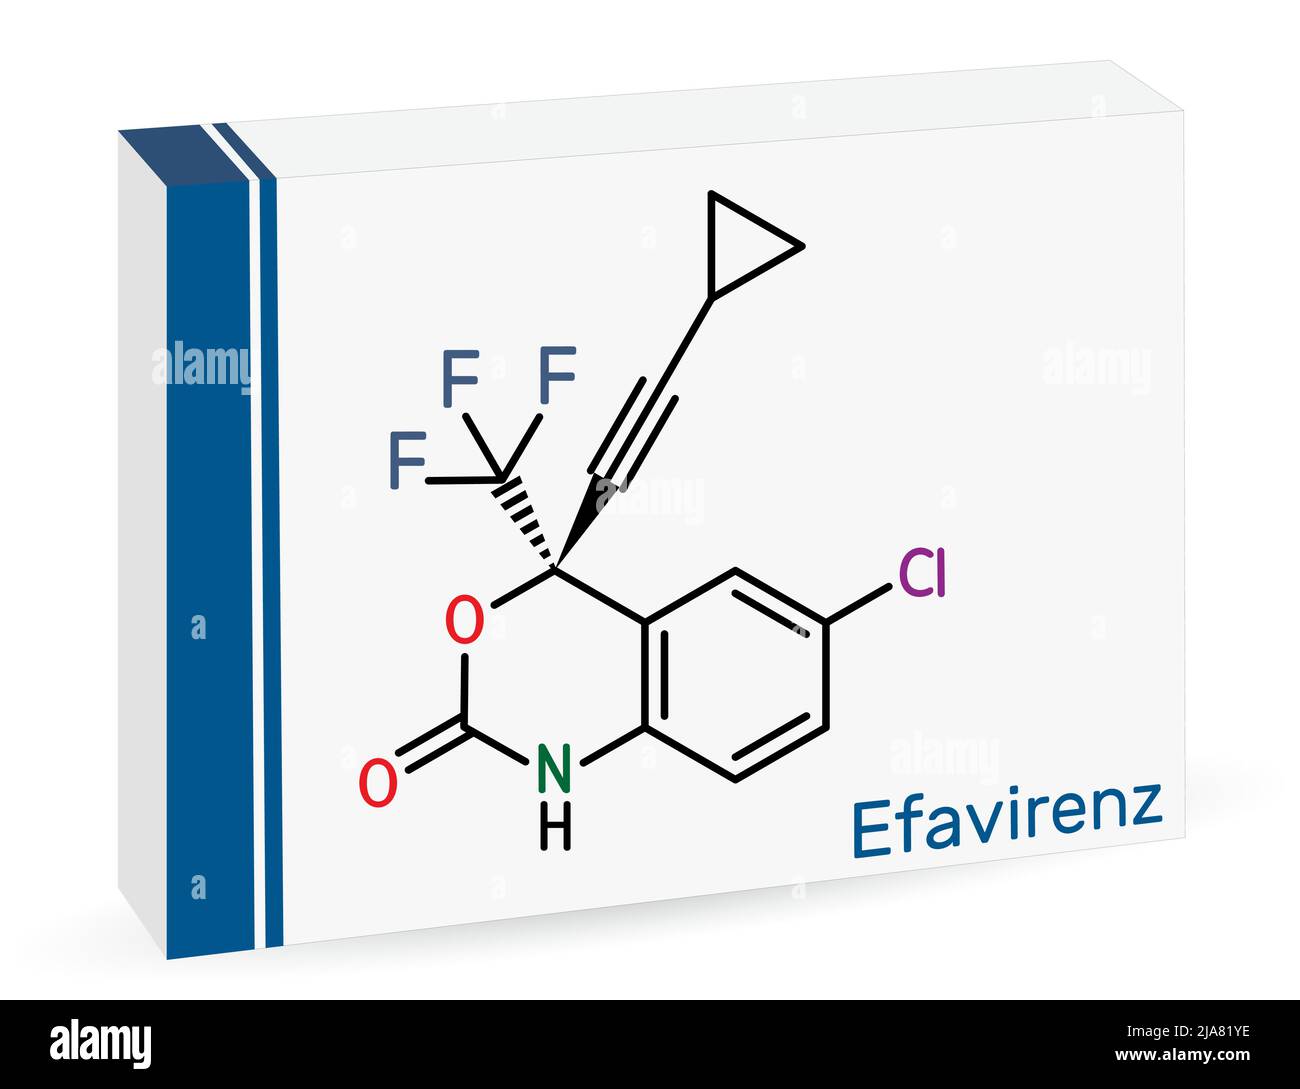 Efavirenz, EFV molecule. It is antiretroviral medication used to treat HIV and AIDS. Skeletal chemical formula. Paper packaging for drugs. Vector illu Stock Vector